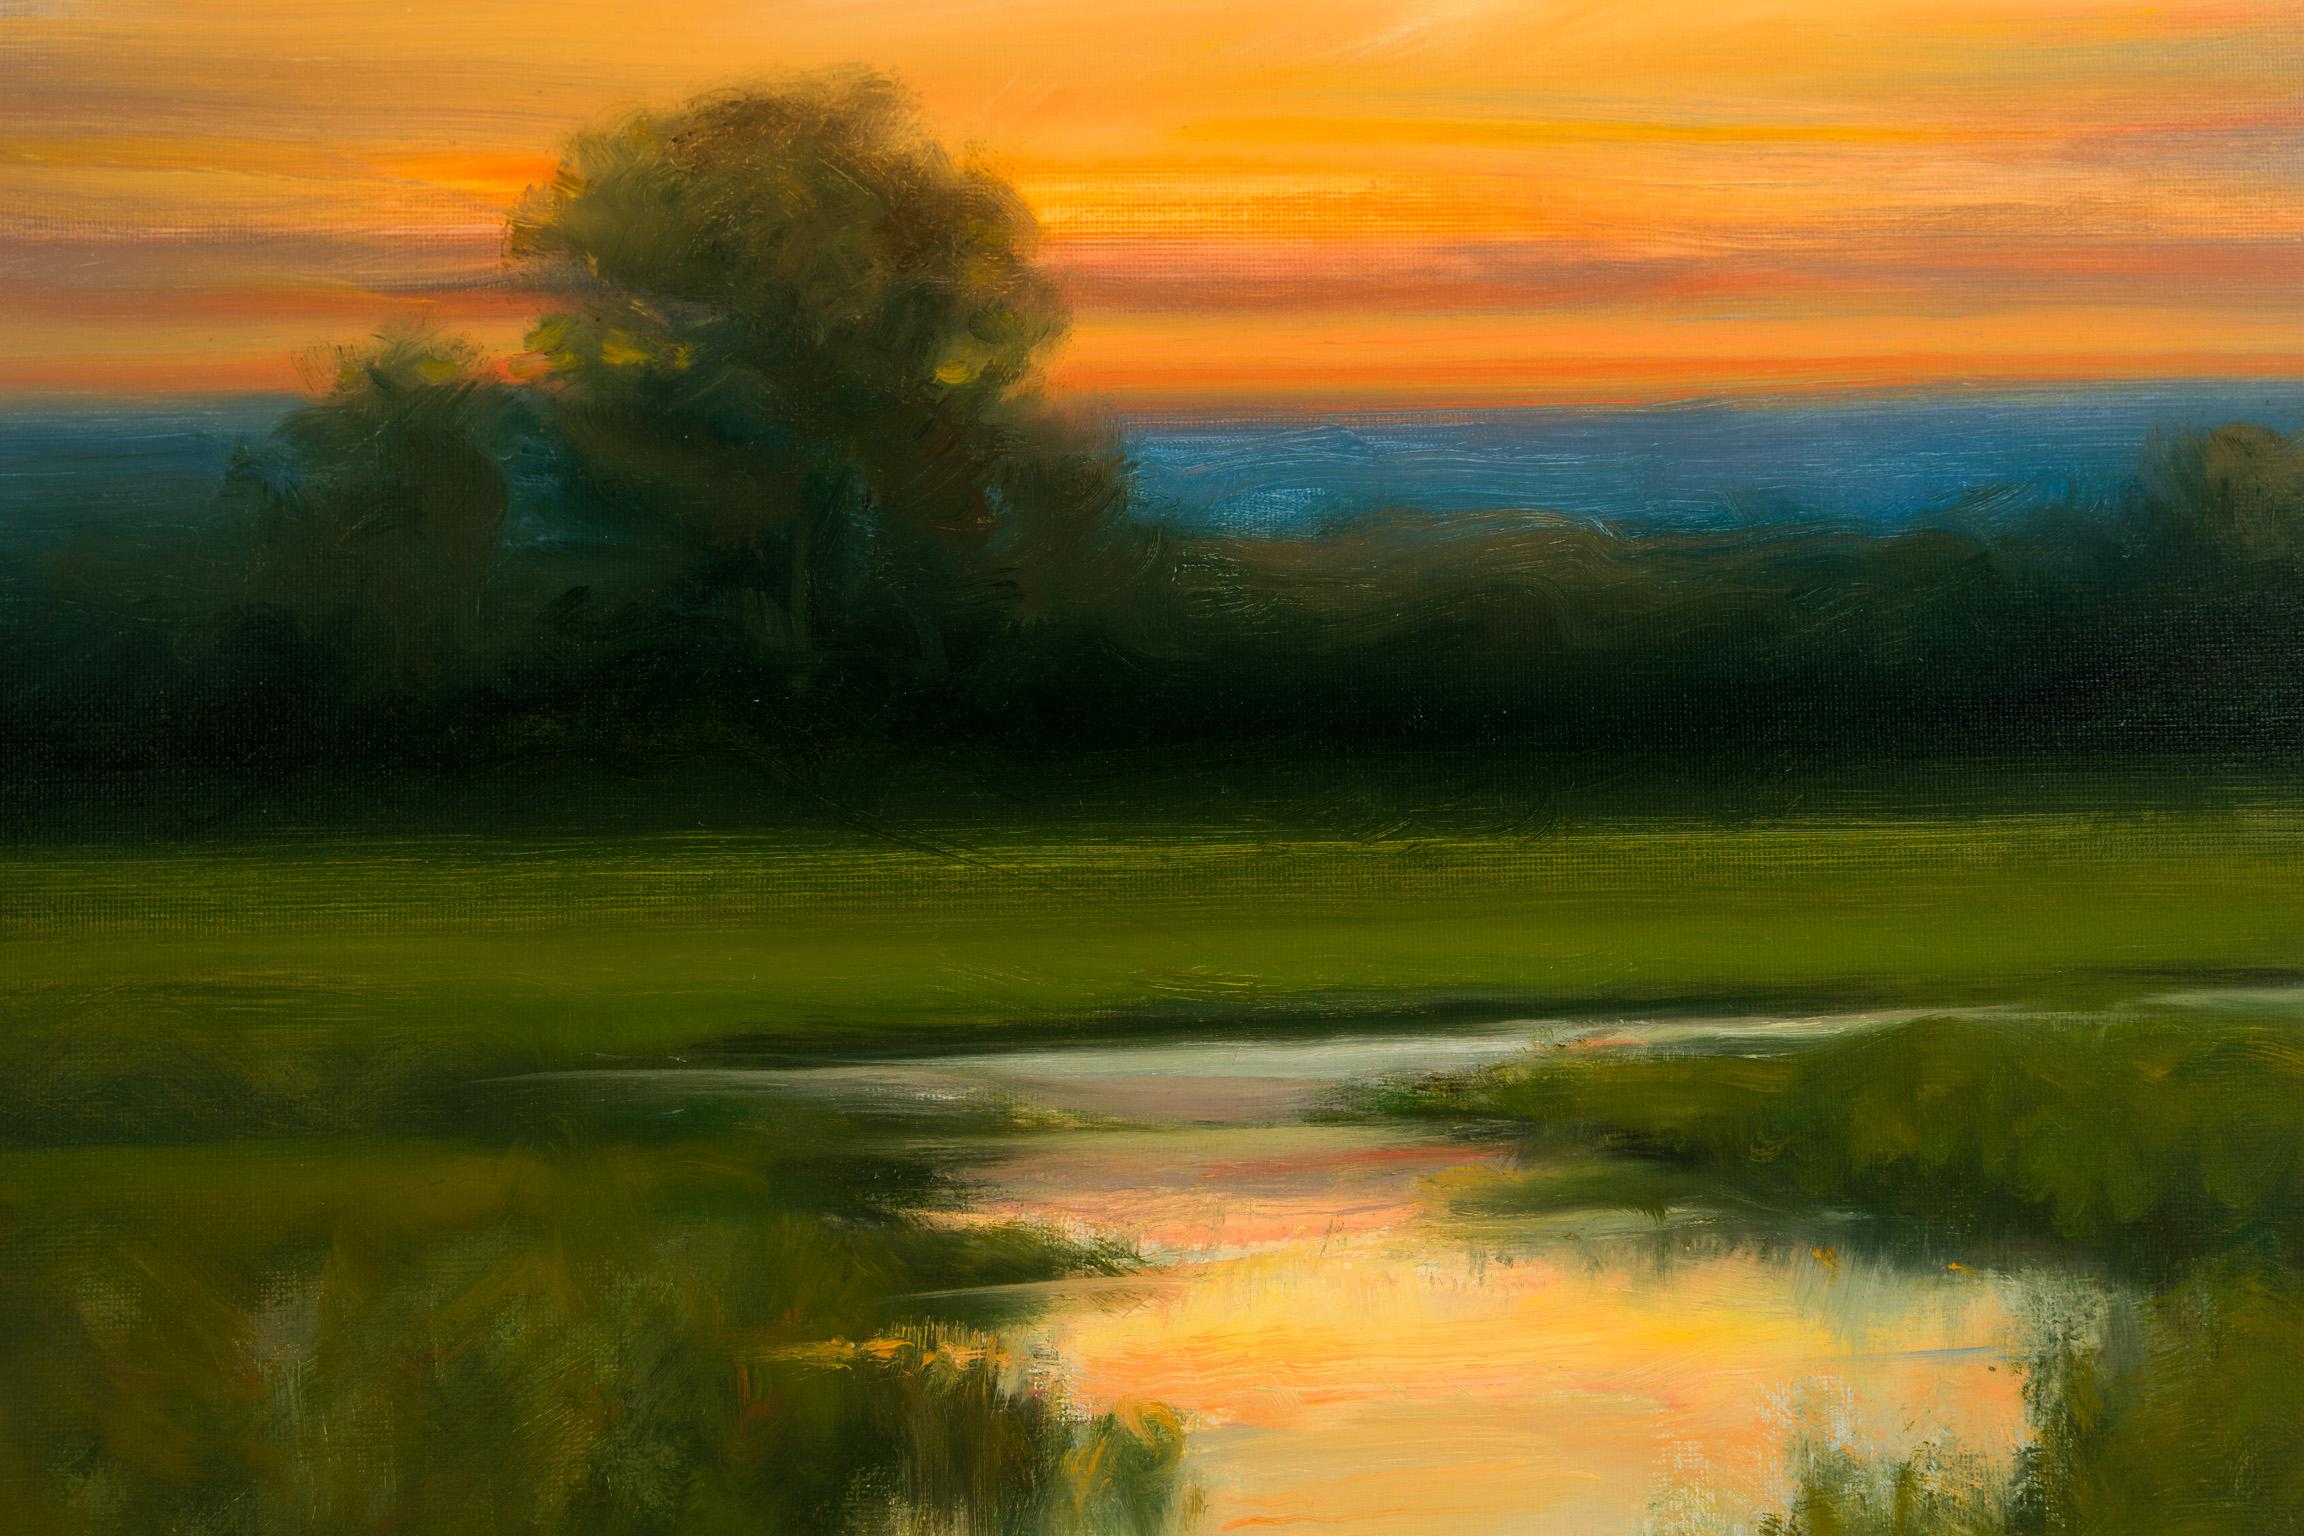 Reflection at Dusk - Painting by Dennis Sheehan